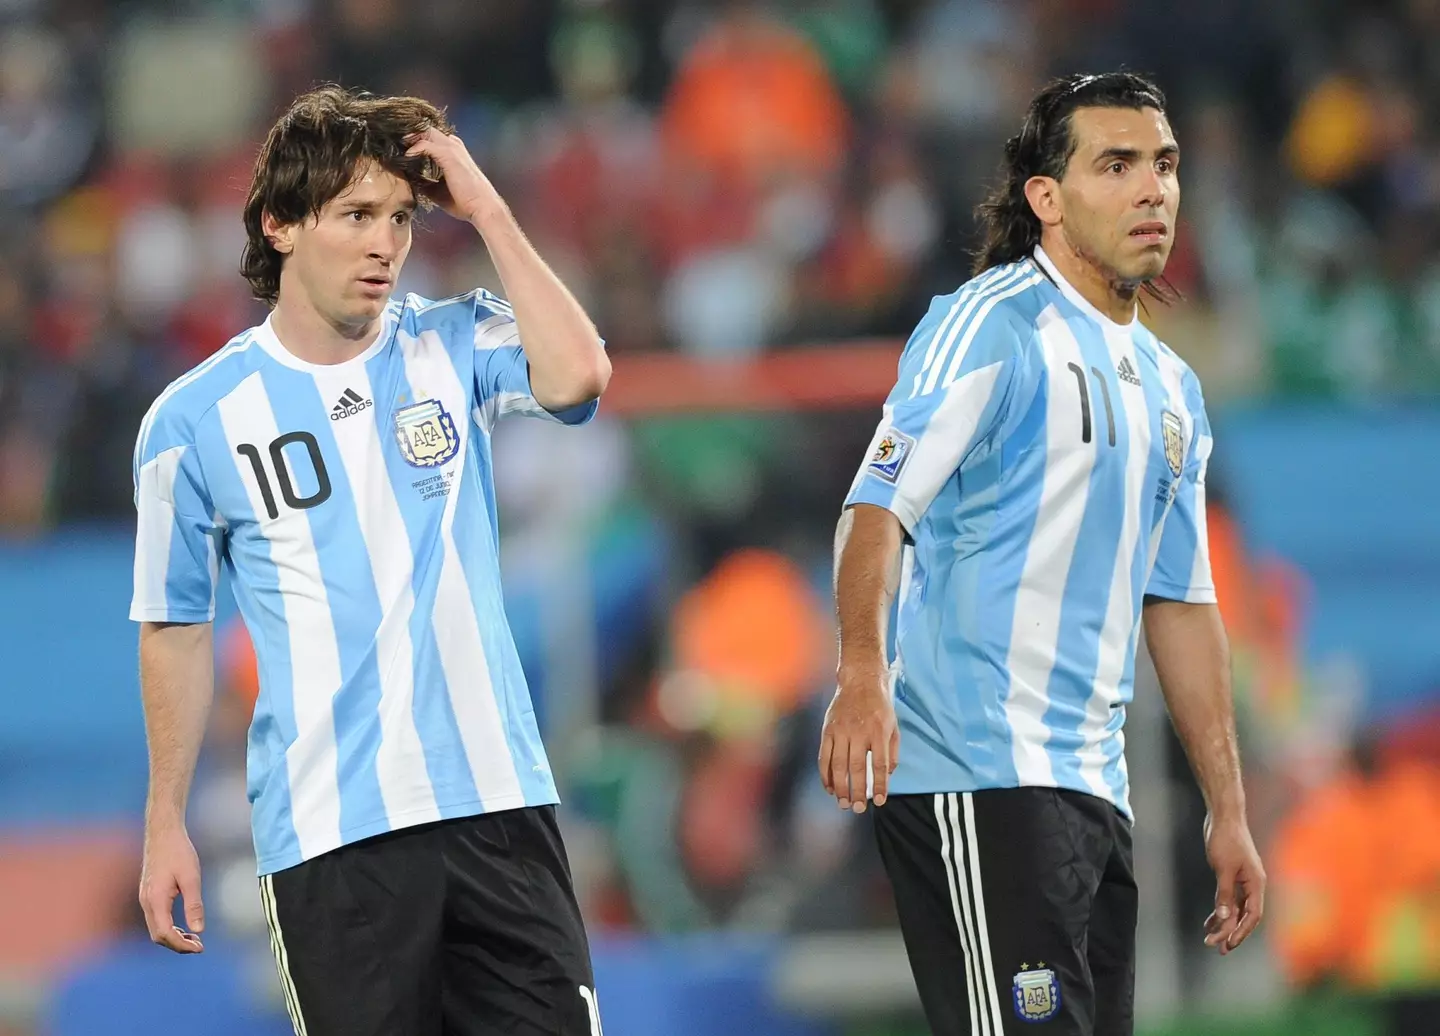 Former Manchester City star Carlos Tevez played alongside World Cup winner Lionel Messi for Argentina.